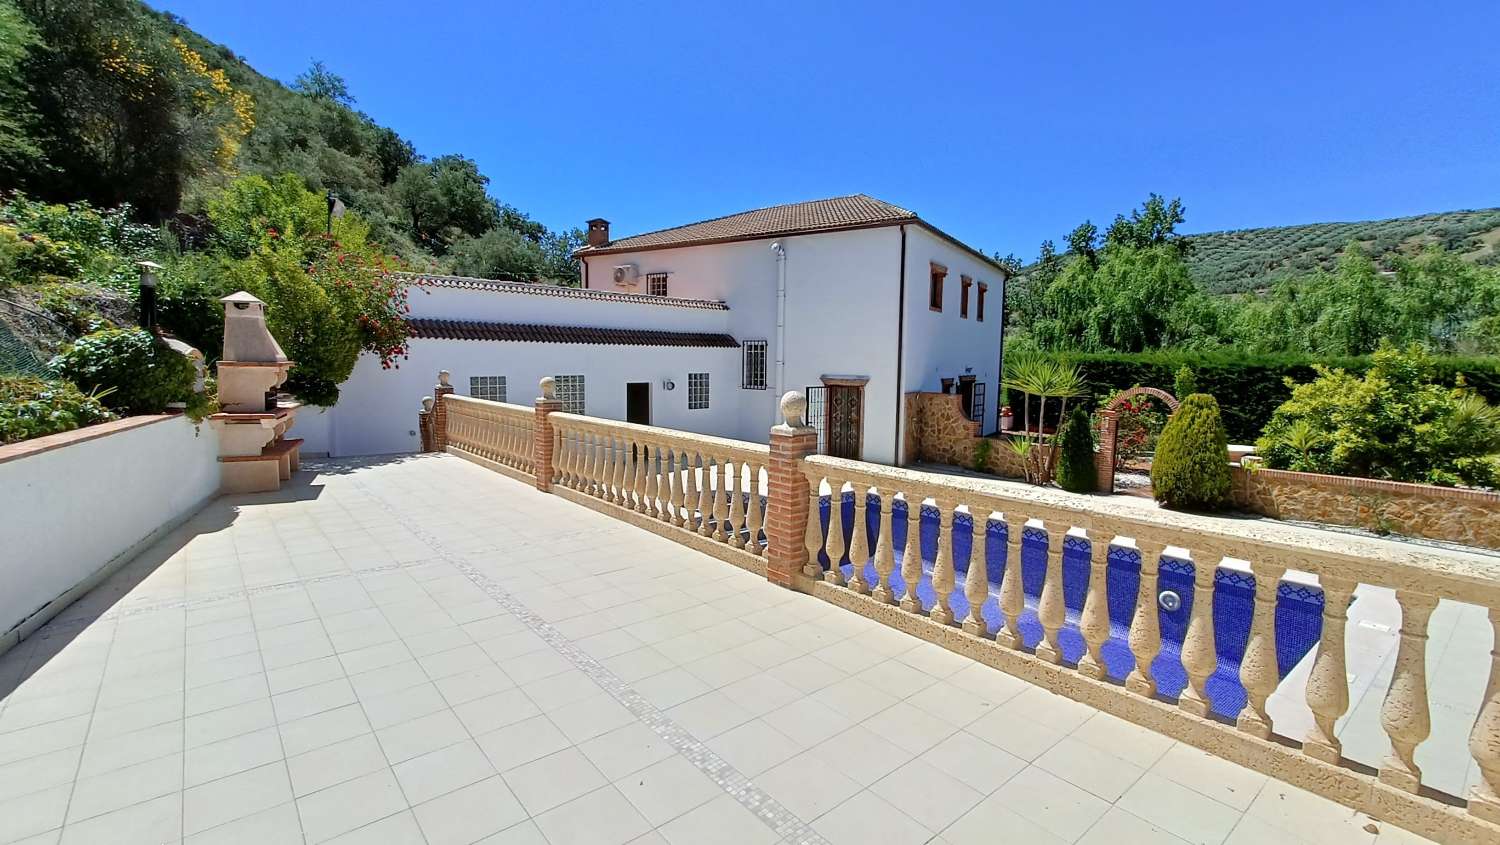 Fantastic 5 bed 5 bath country property with gardens, large pool, games pitch, nice views...